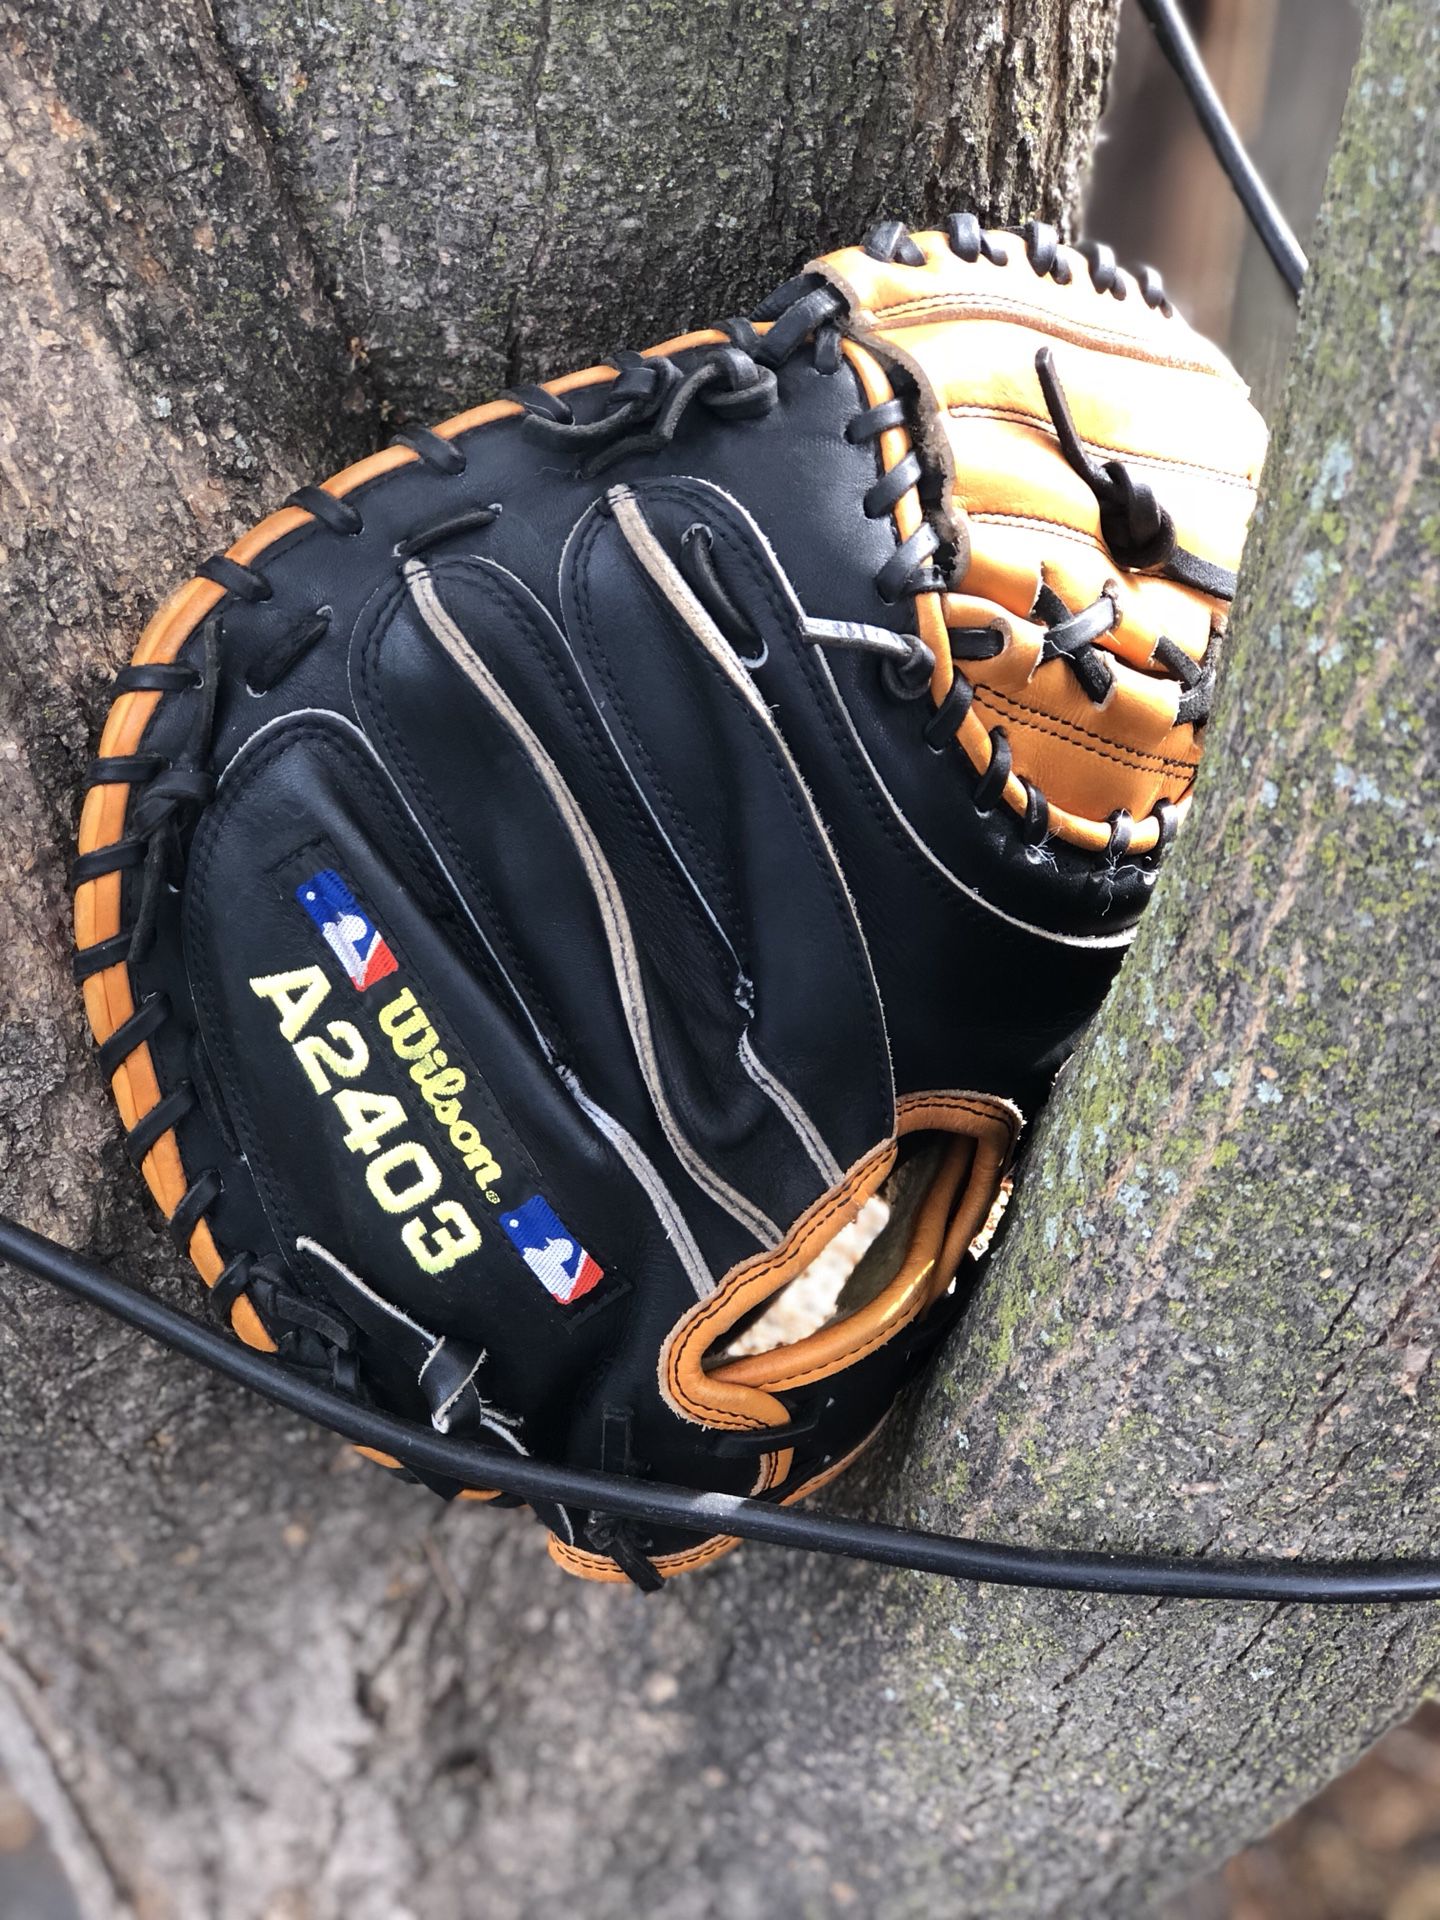 USA Wilson　A2000  a2403 pudge キャッチャーミット